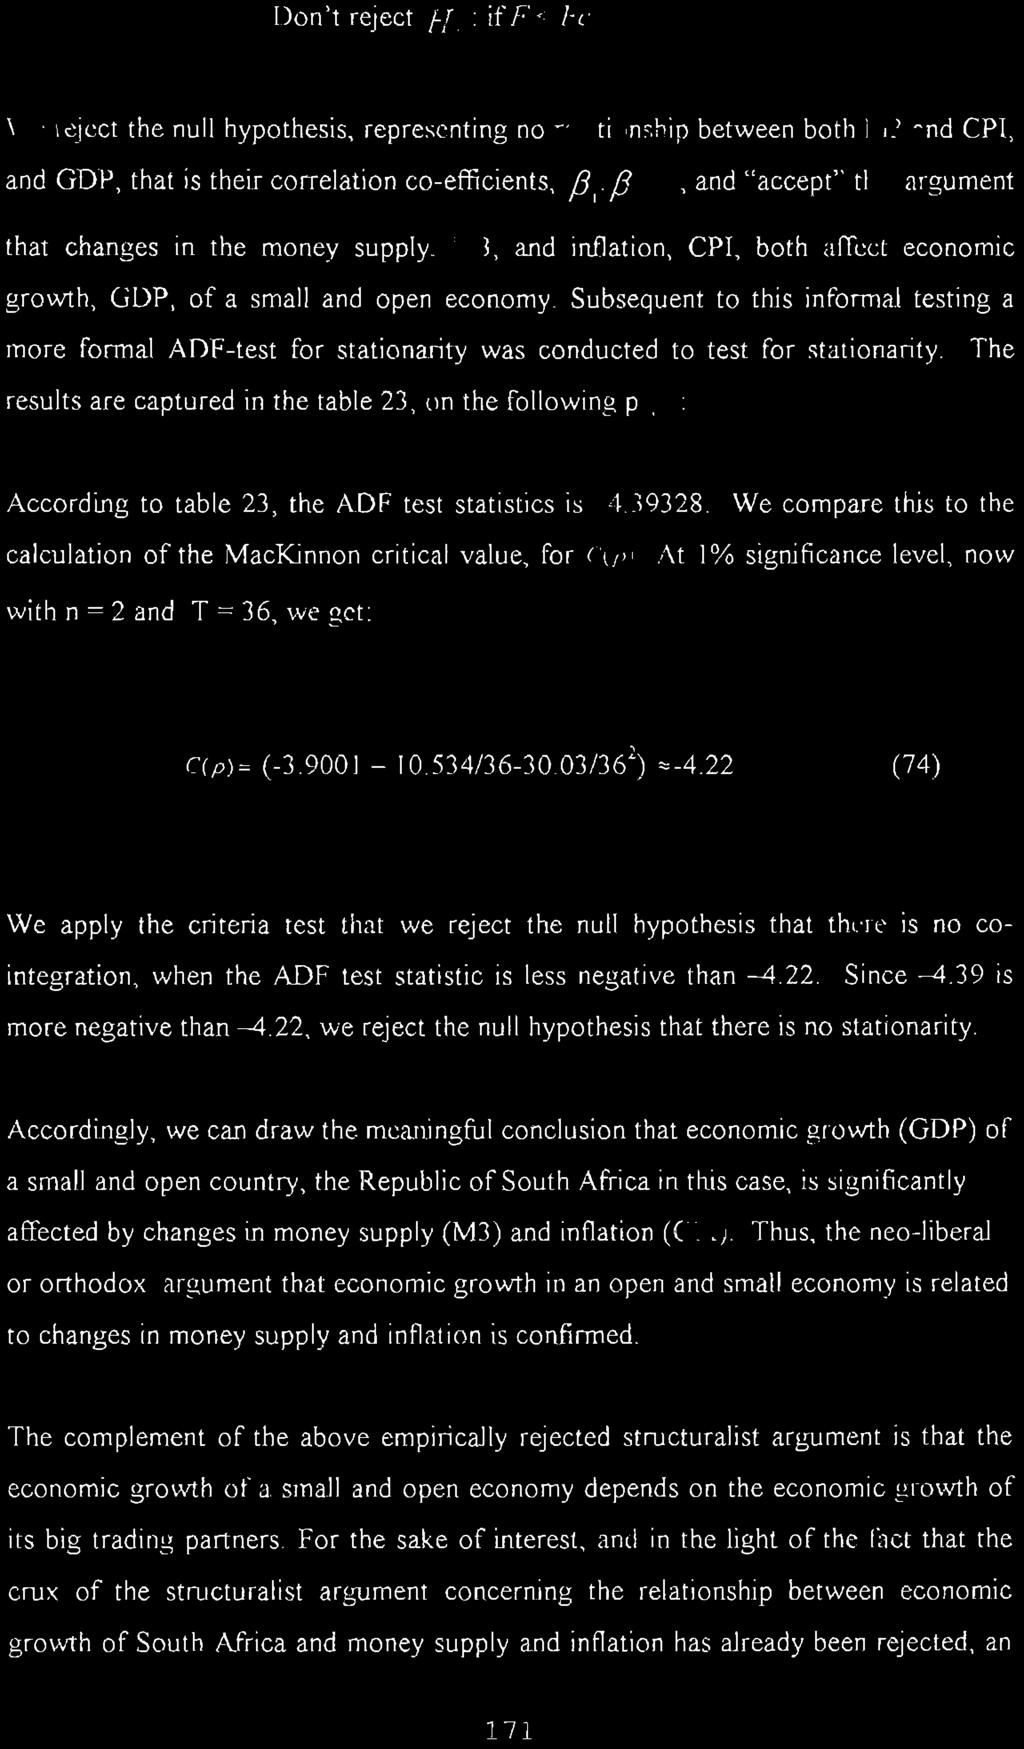 Don't reject H 0: iff < Fe We reject the null hypothesis, representing no relationship between both M3 and CPI, and GDP, that is their correlation co-efficients, /3,,/3, =0, and "accept" the argument